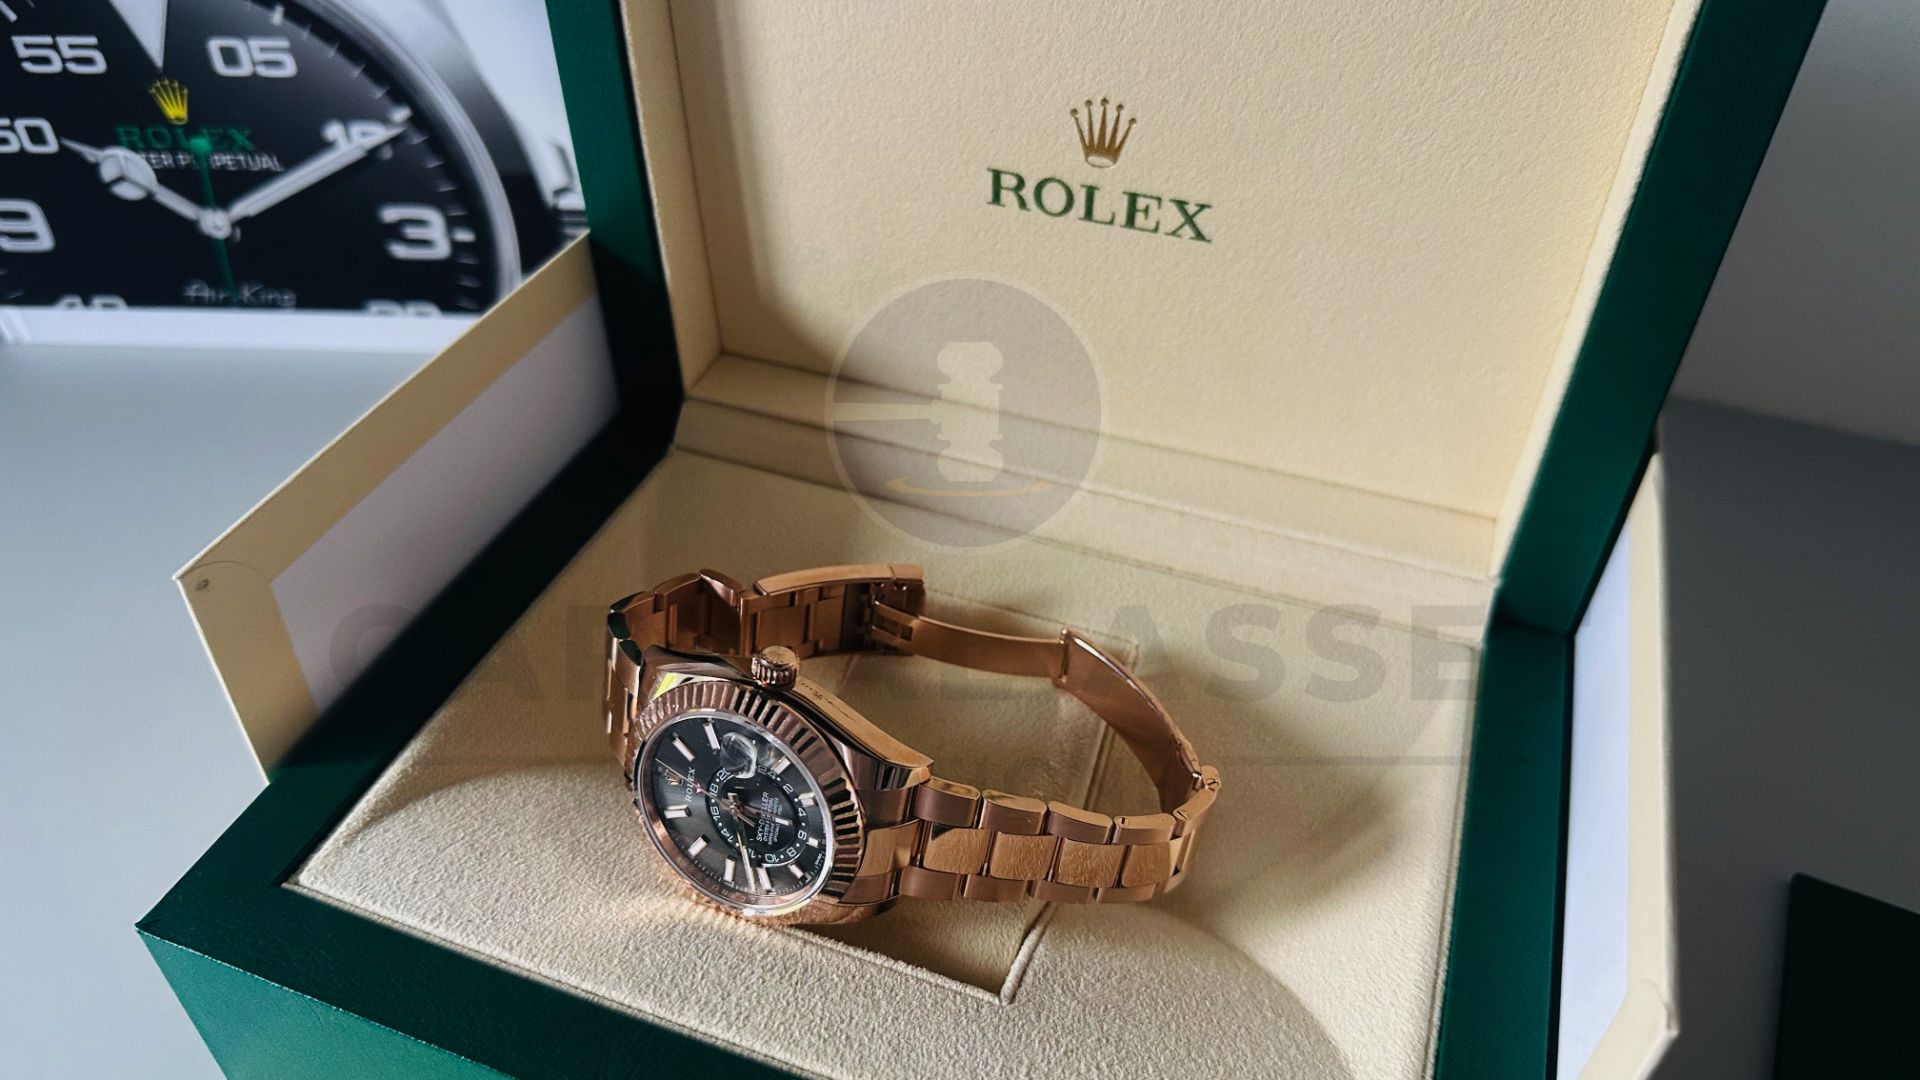 ROLEX SKY-DWELLER 42MM *18CT EVEROSE GOLD* (2023 NEW / UNWORN) *SLATE DIAL* (BEAT THE 10 YEAR WAIT) - Image 19 of 37